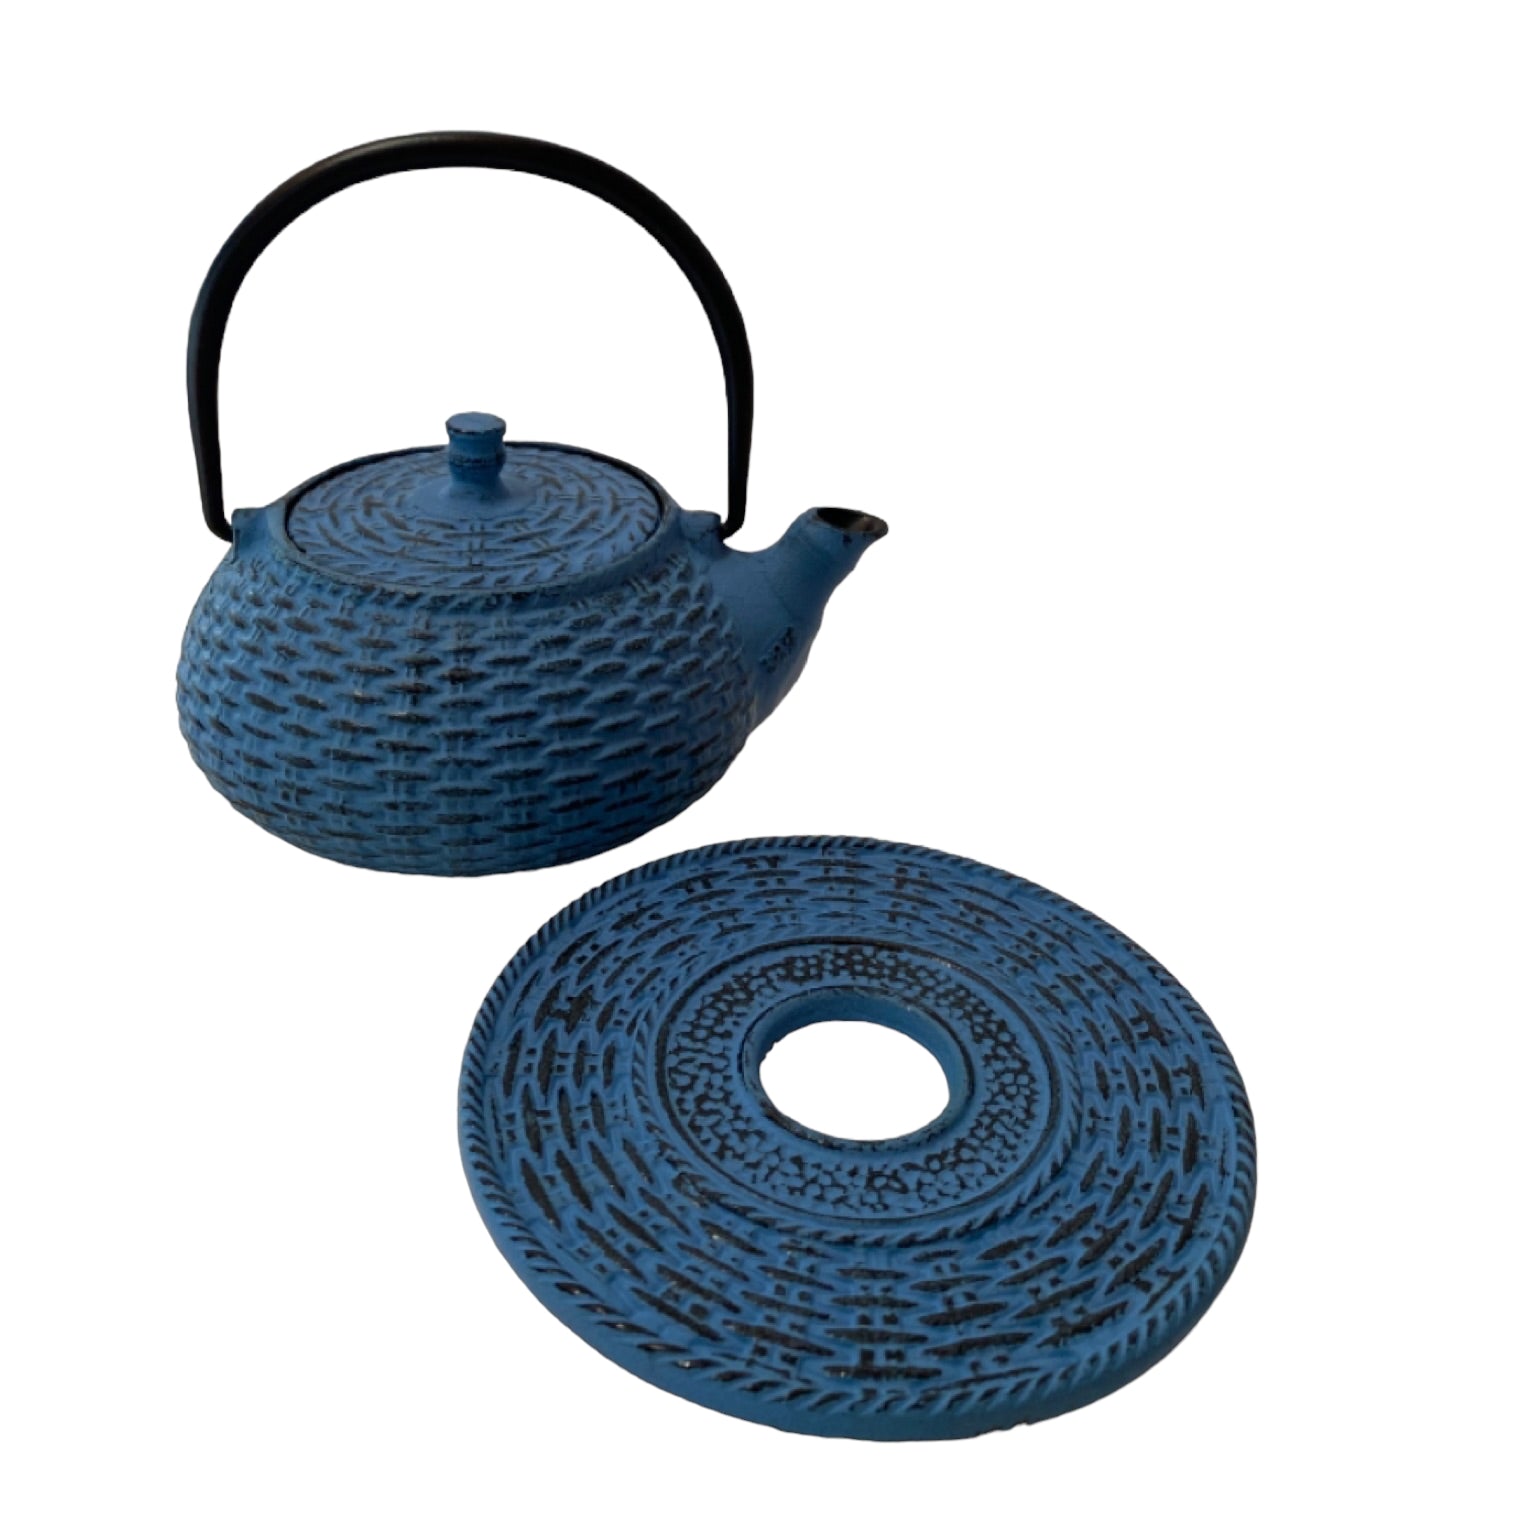 Teapot Cast Iron Blue Vintage - The Renmy Store Homewares & Gifts 